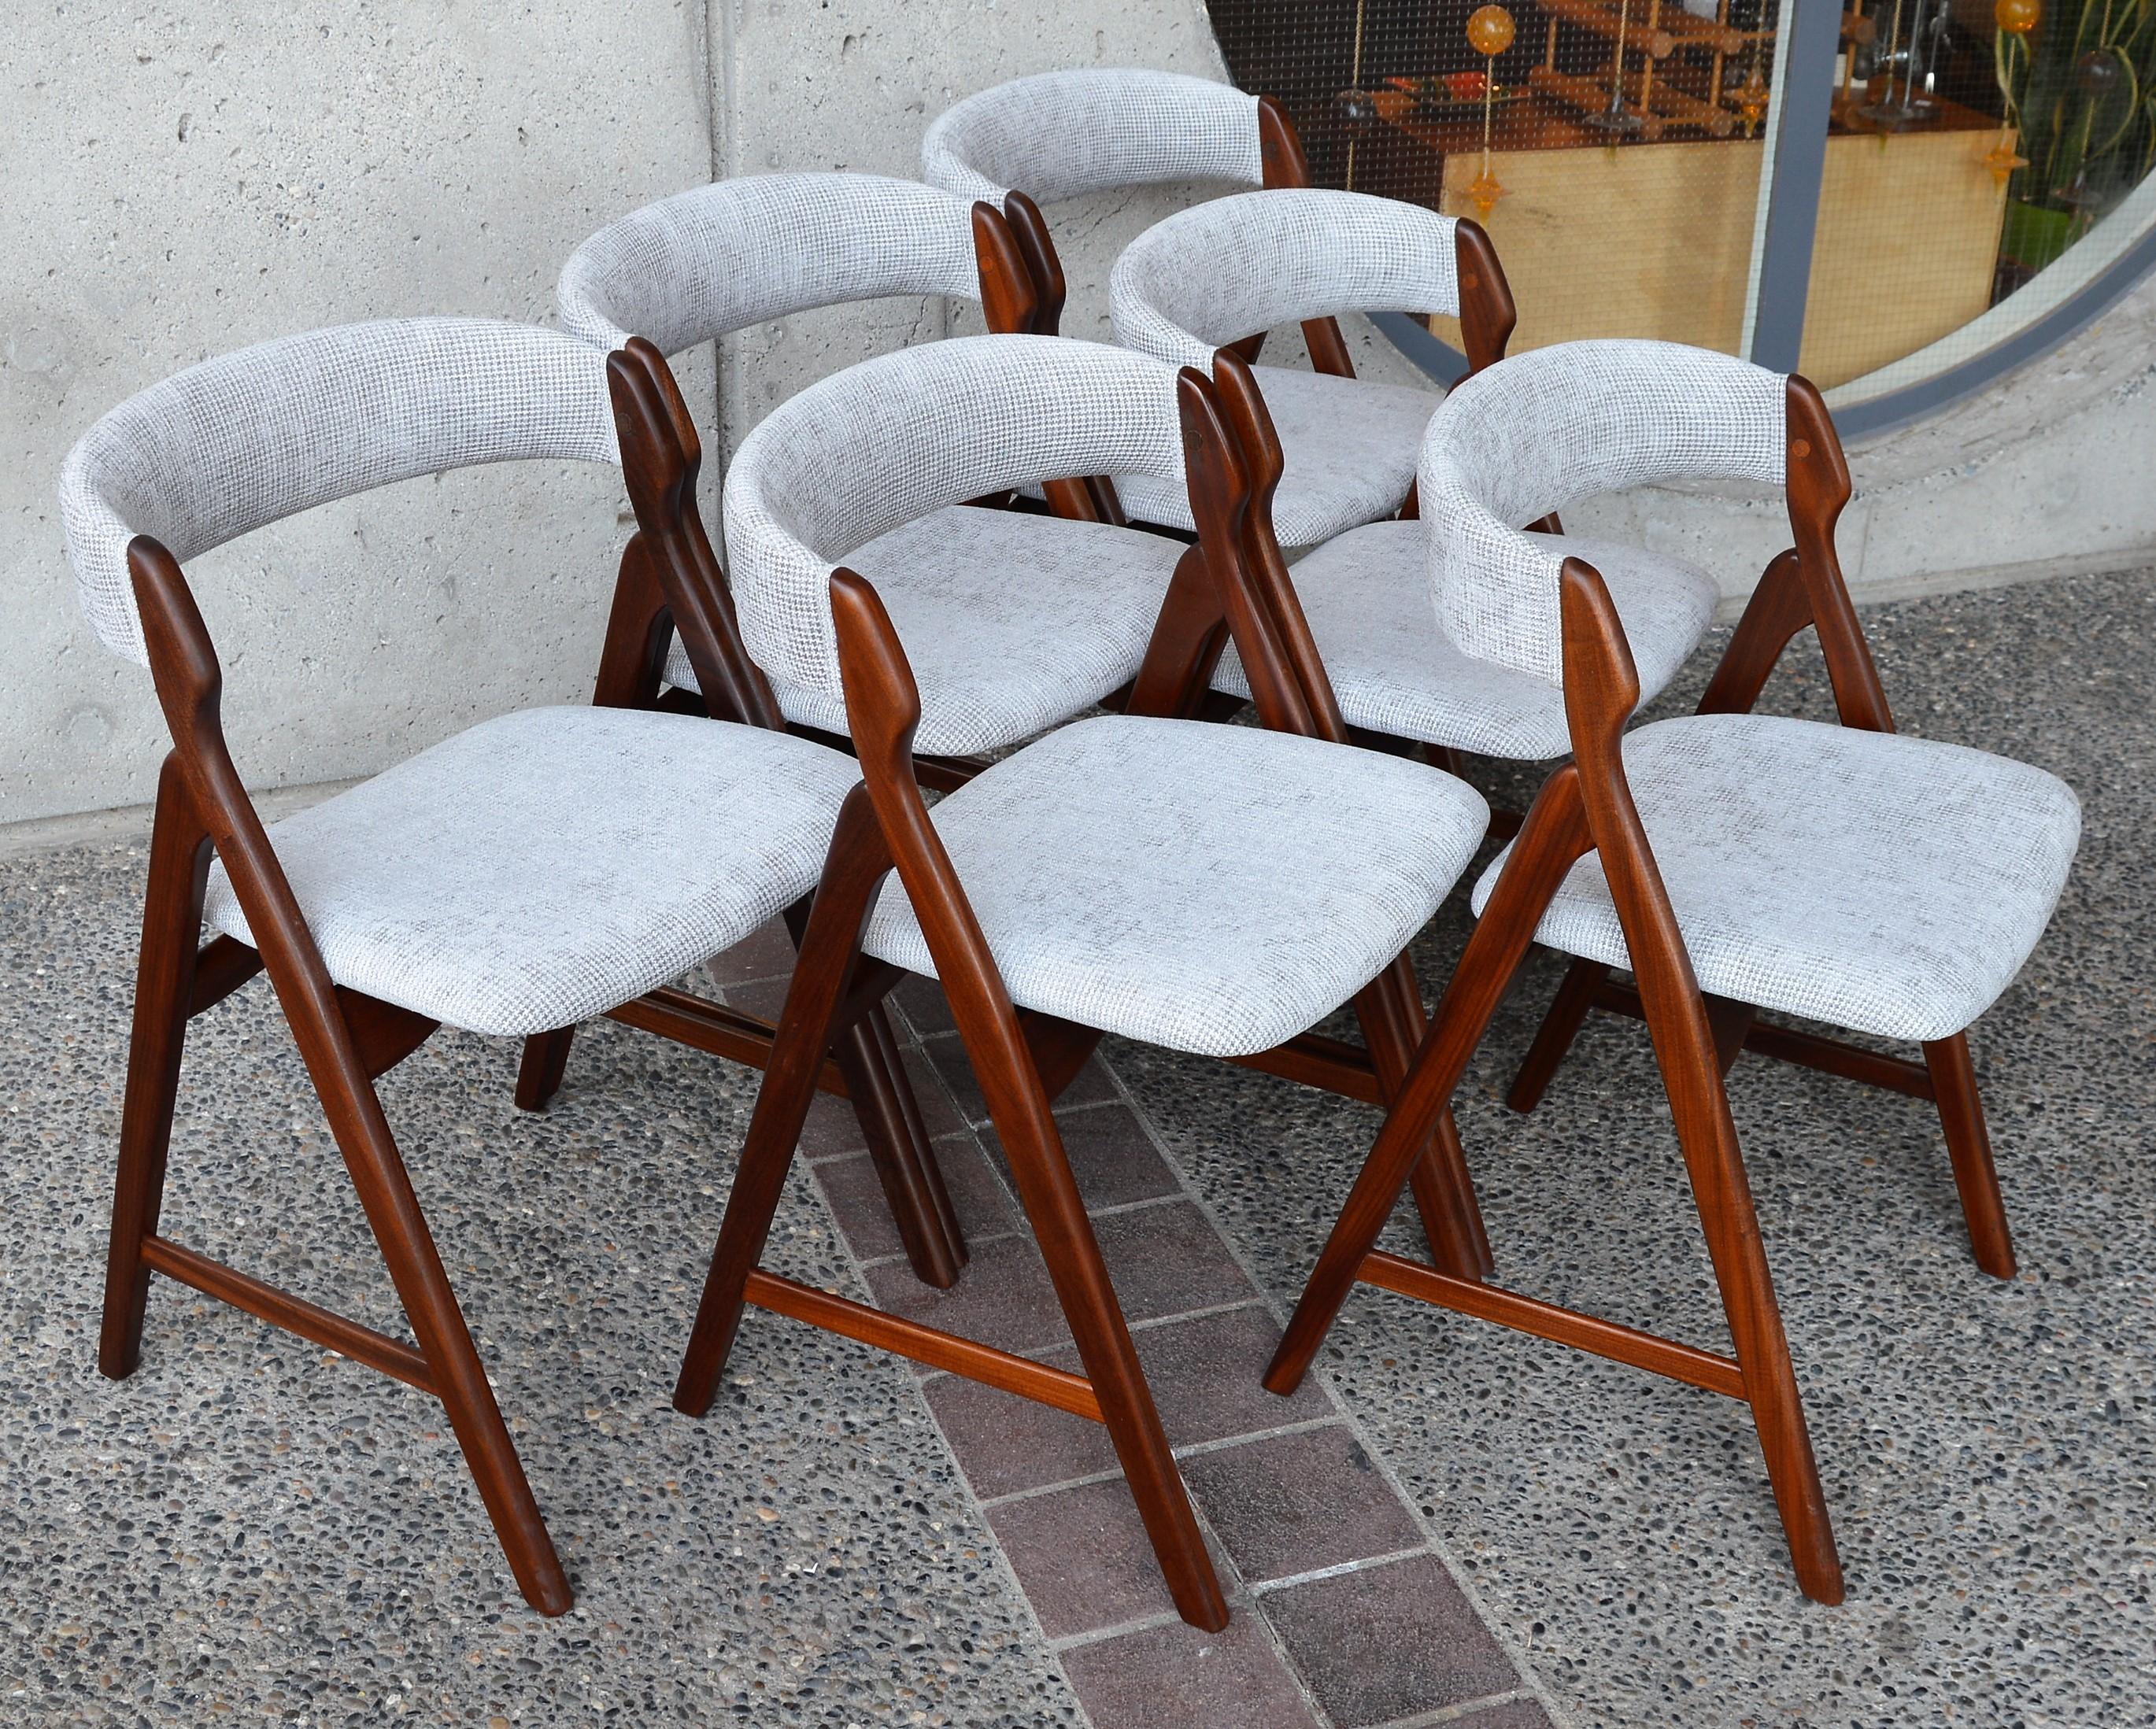 Mid-20th Century Set of Six Teak A-Frame Dining Chairs by T.H. Harlev for Farstrup For Sale